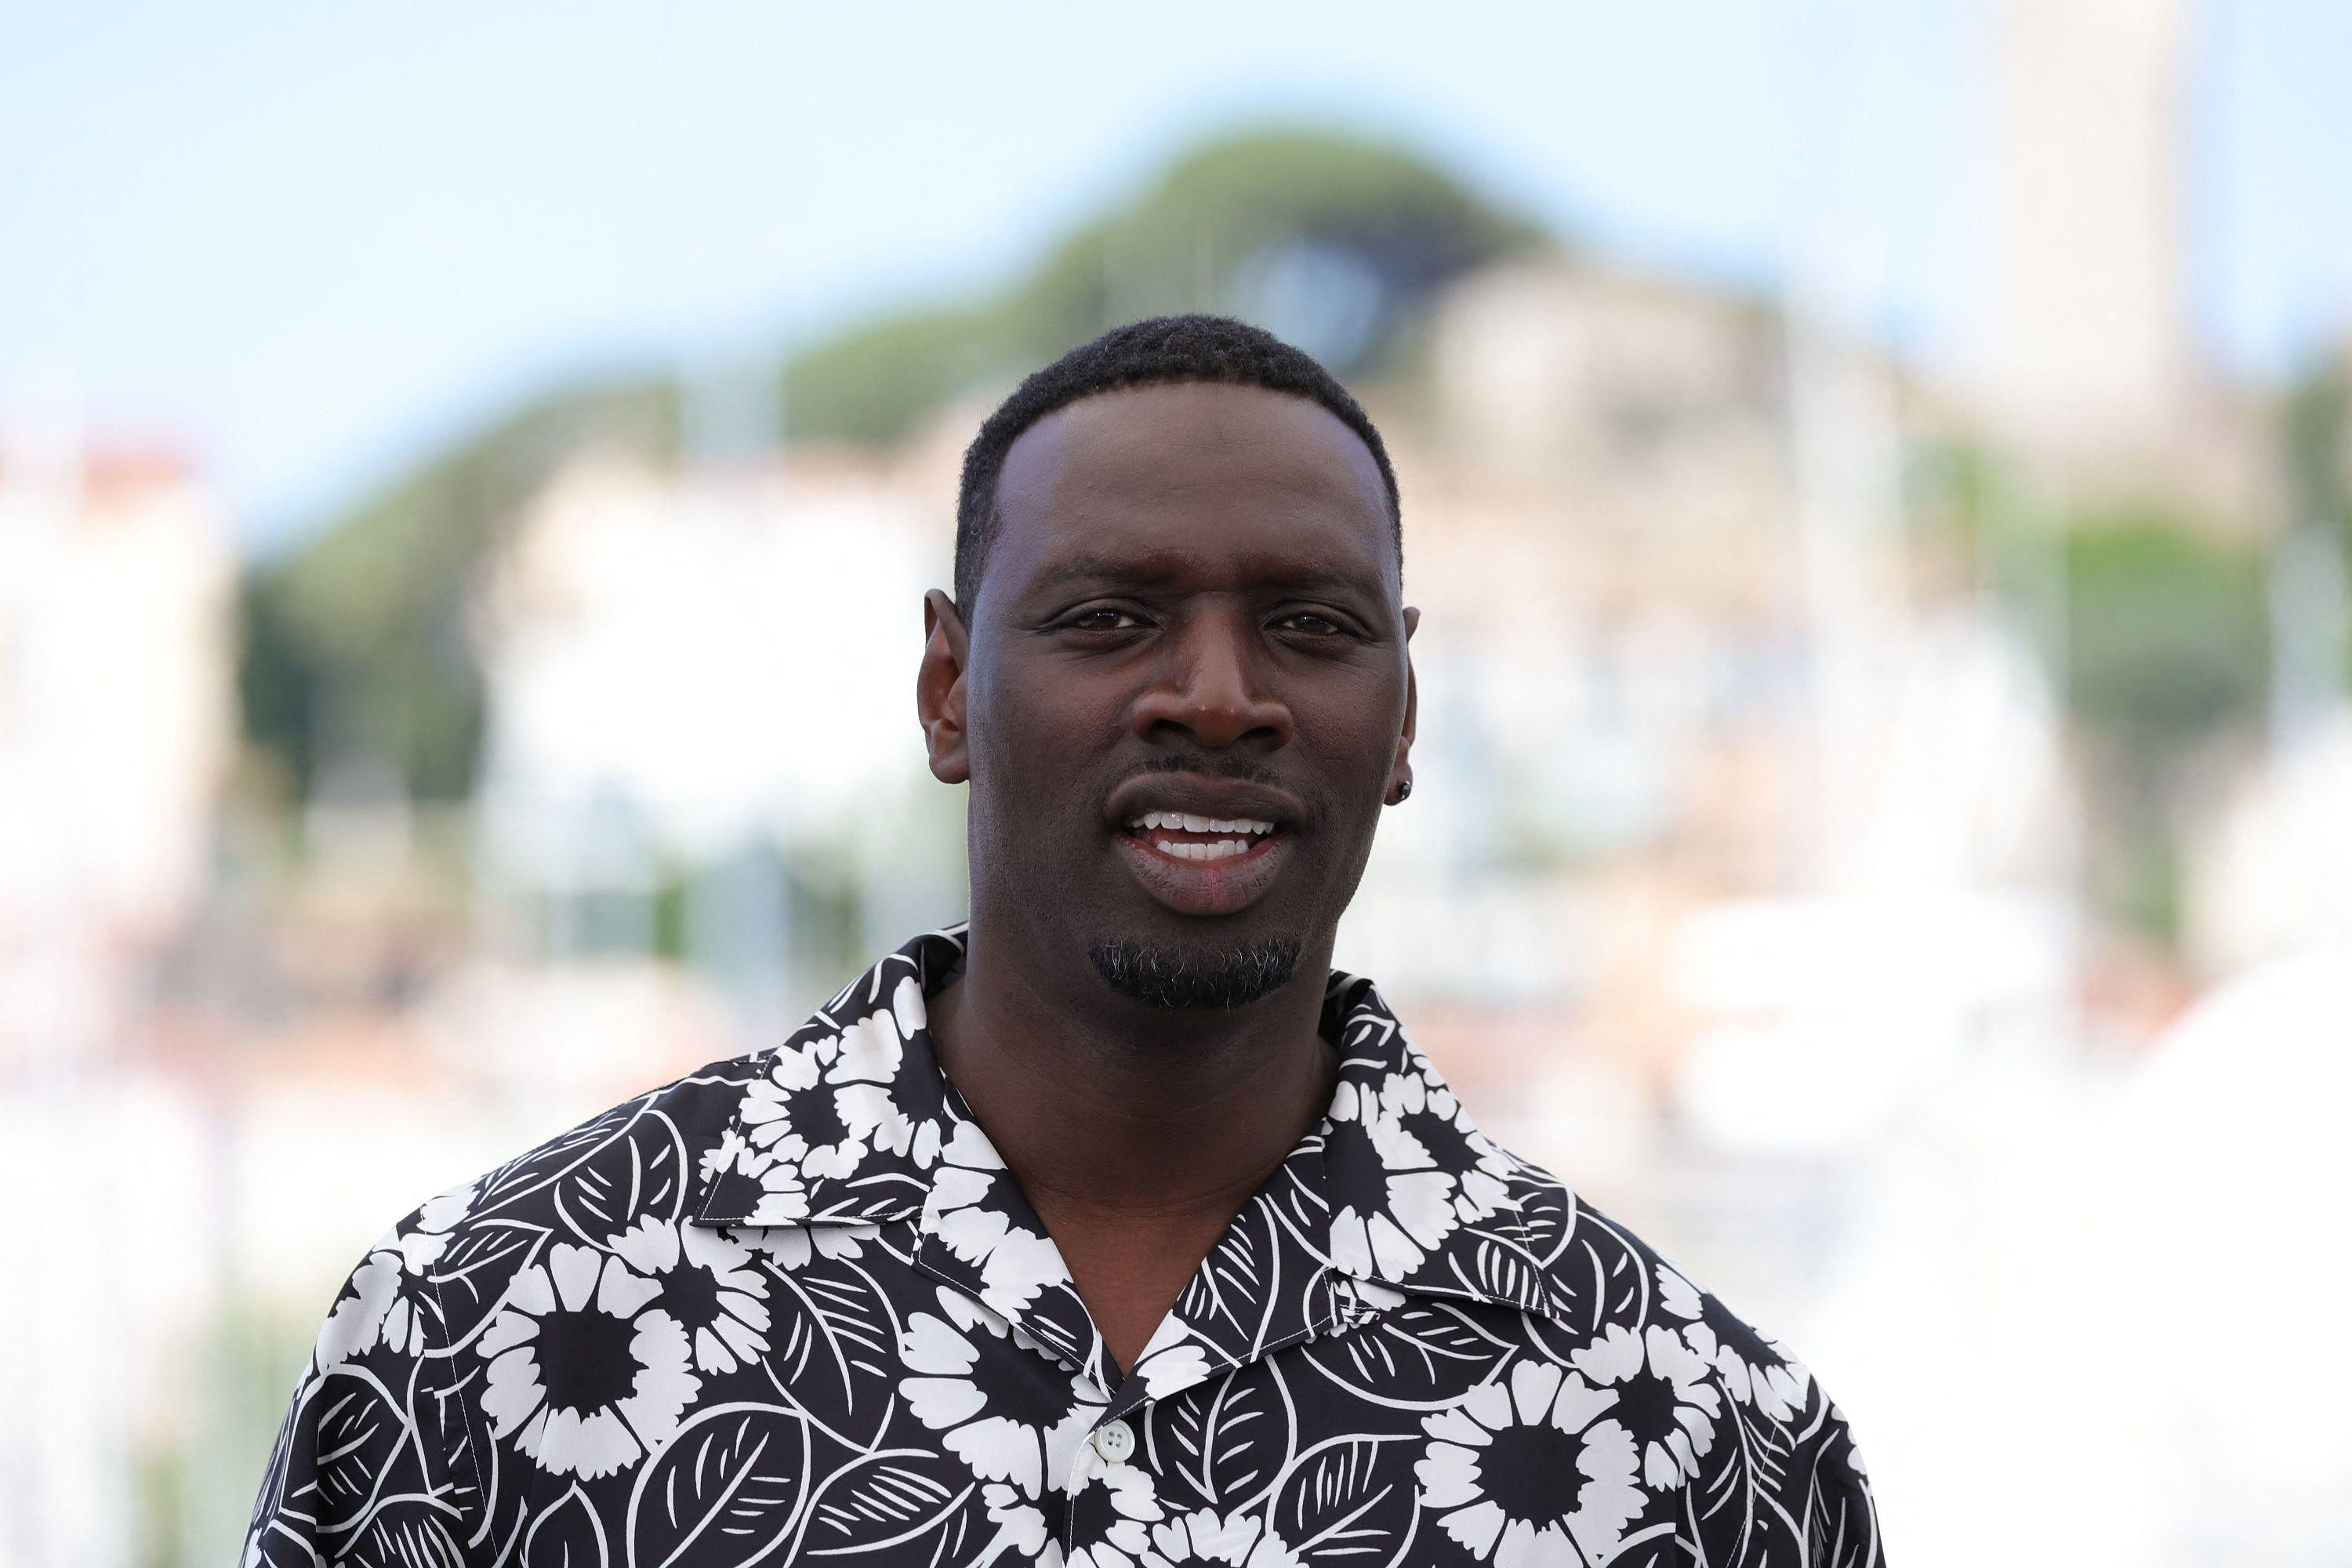 Omar Sy on all cultural fronts